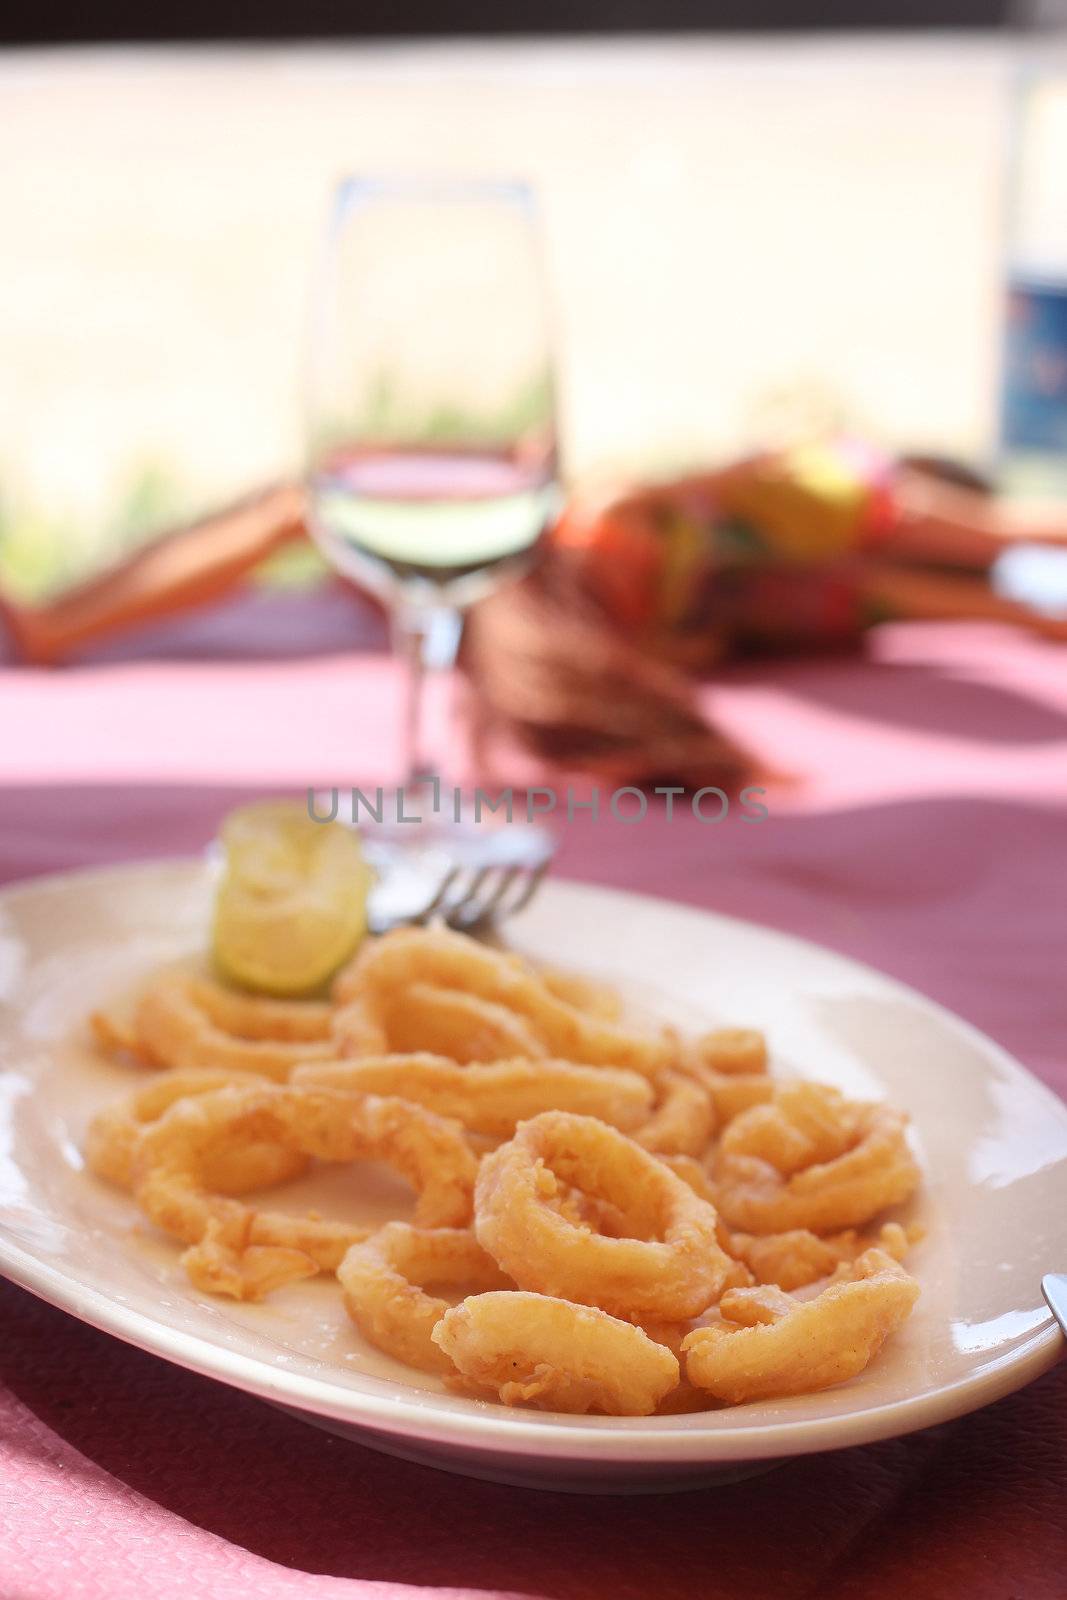 A plate of fried calamari, served with a glass of white wine. Soft focus, blurred background